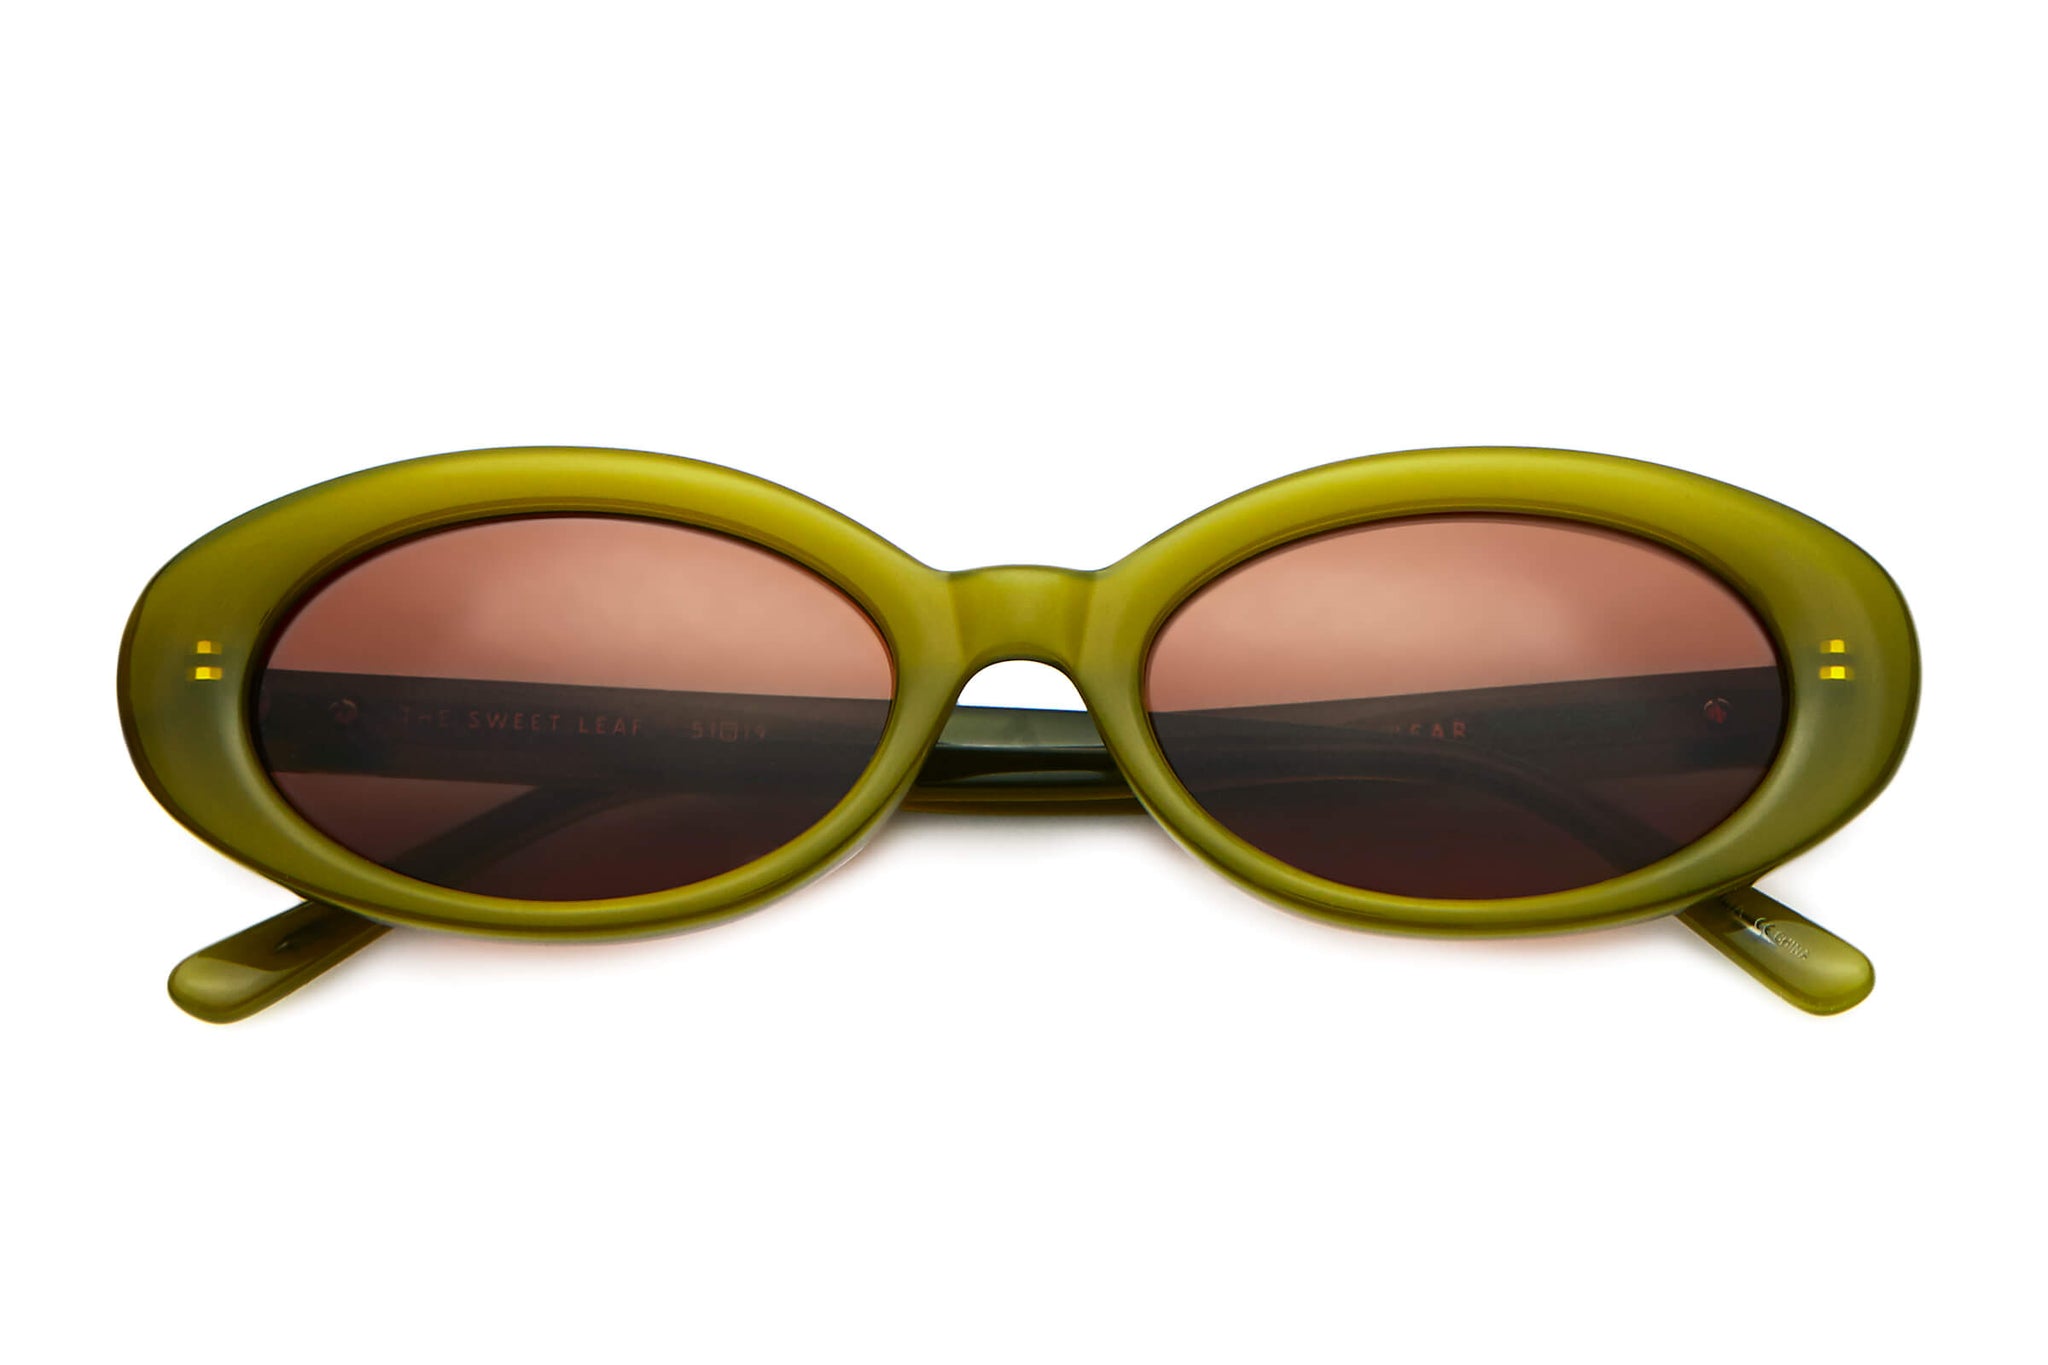 These designer sunglasses will make any outfit look 100% cooler